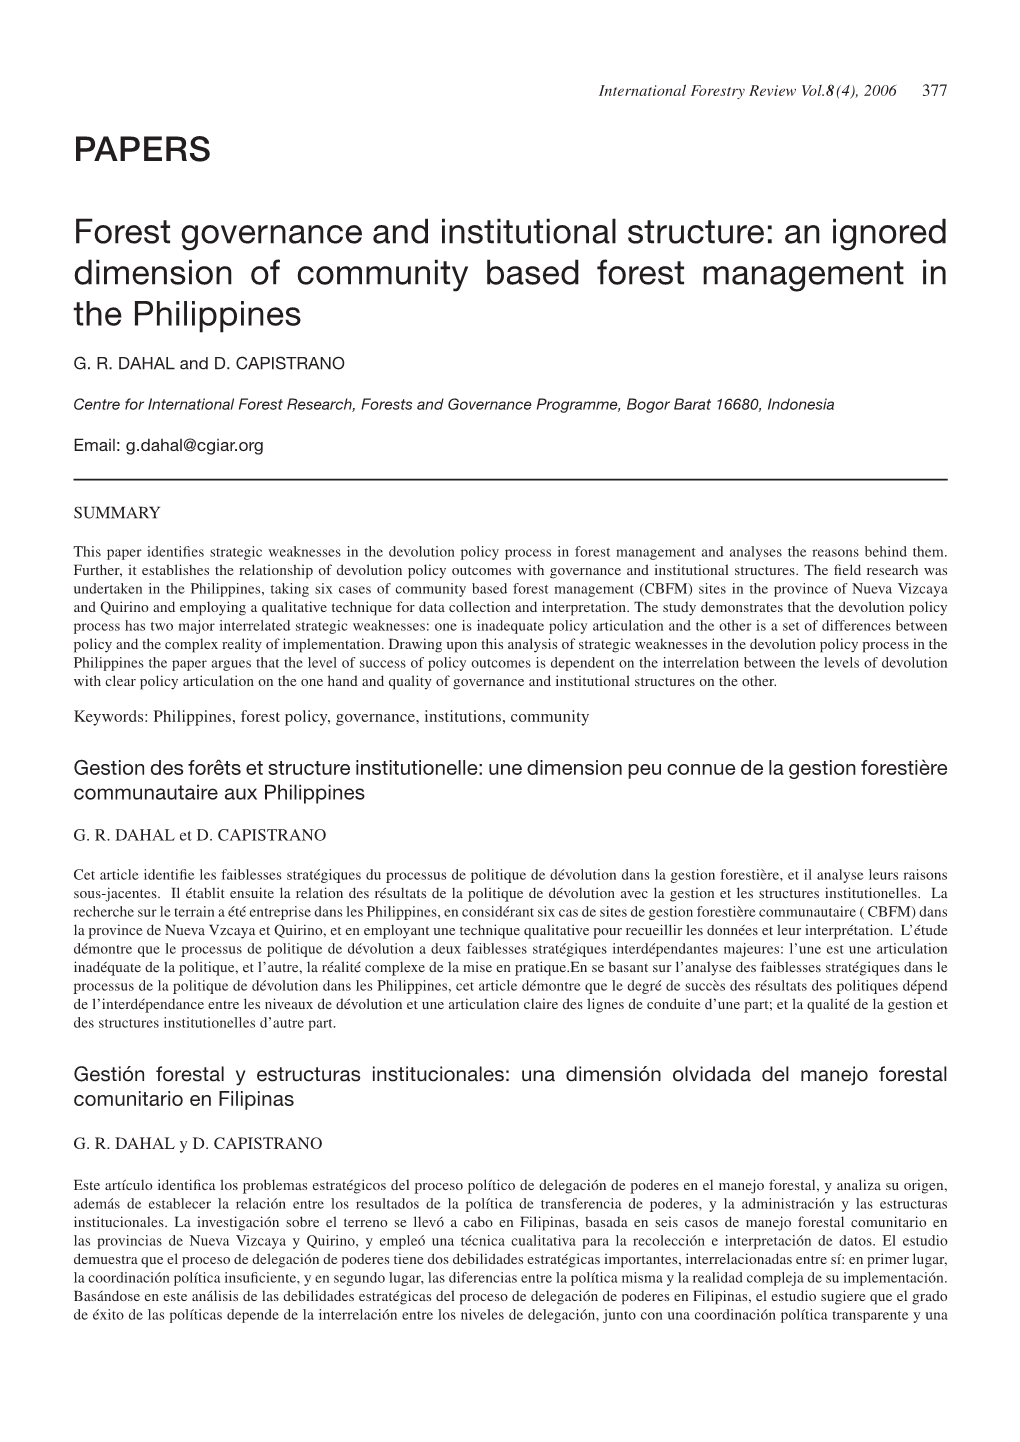 Forest Governance and Institutional Structure: an Ignored Dimension of Community Based Forest Management in the Philippines